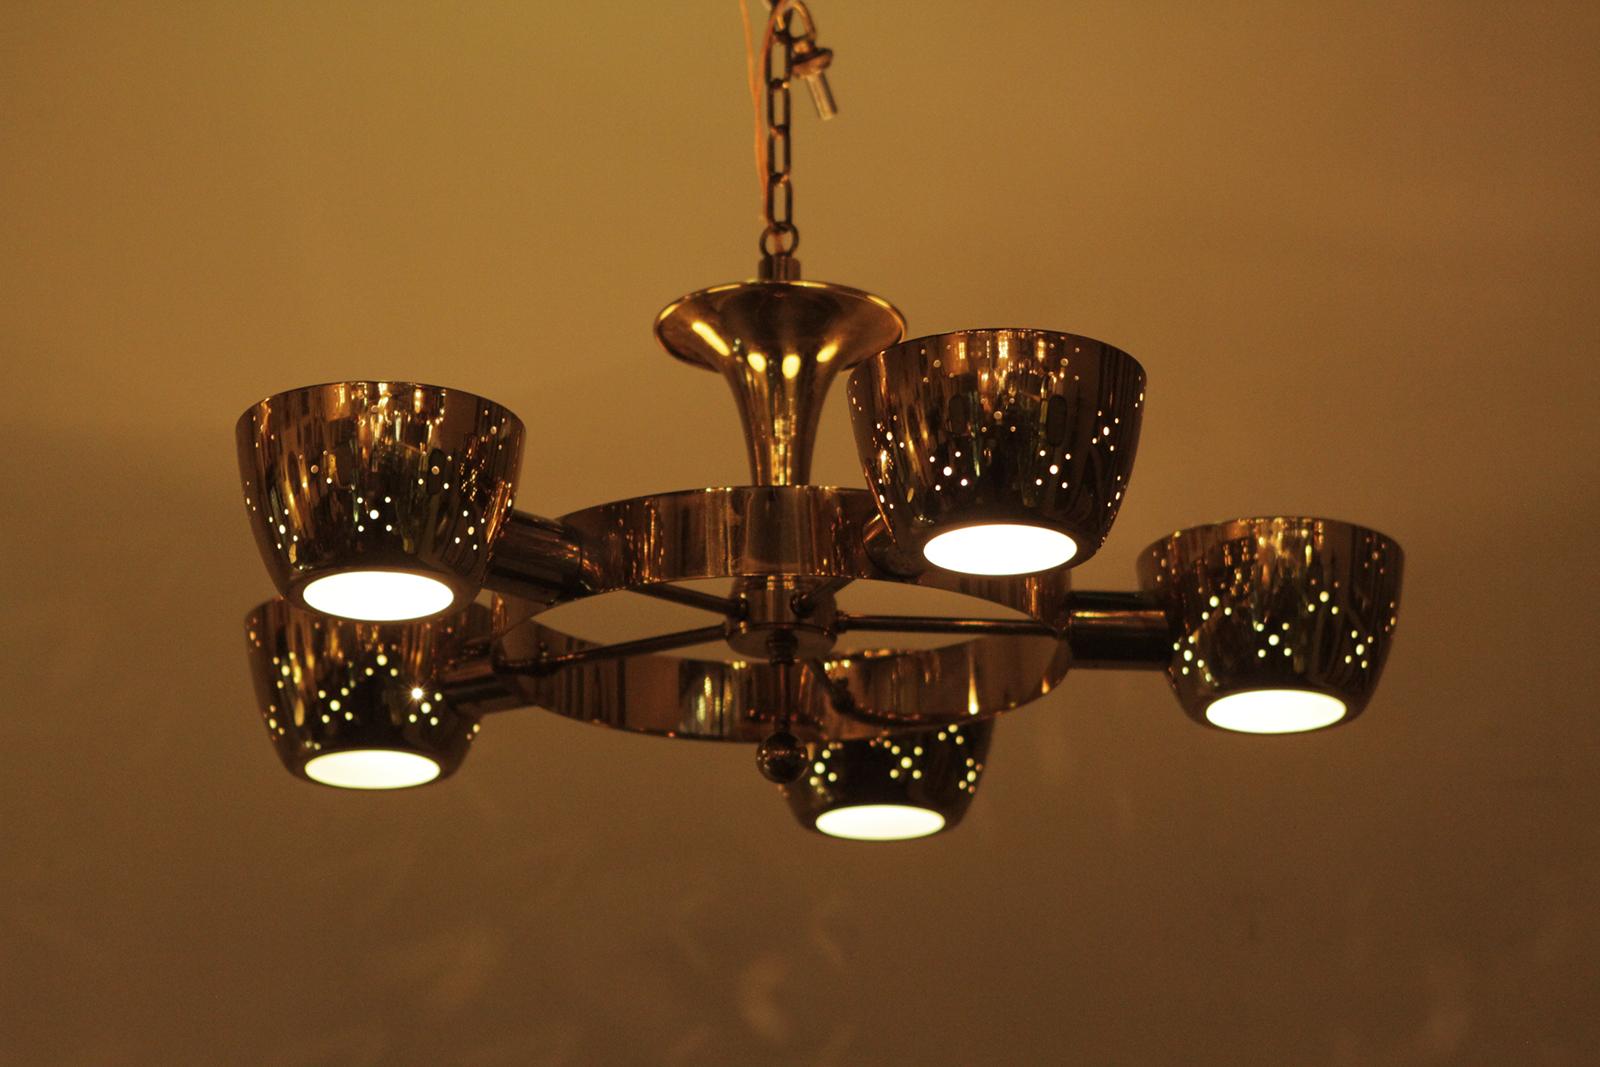 Midcentury chandelier after Gino Sarfatti for Lightolier, USA.
 Dimensions: 13” H x 26” D.